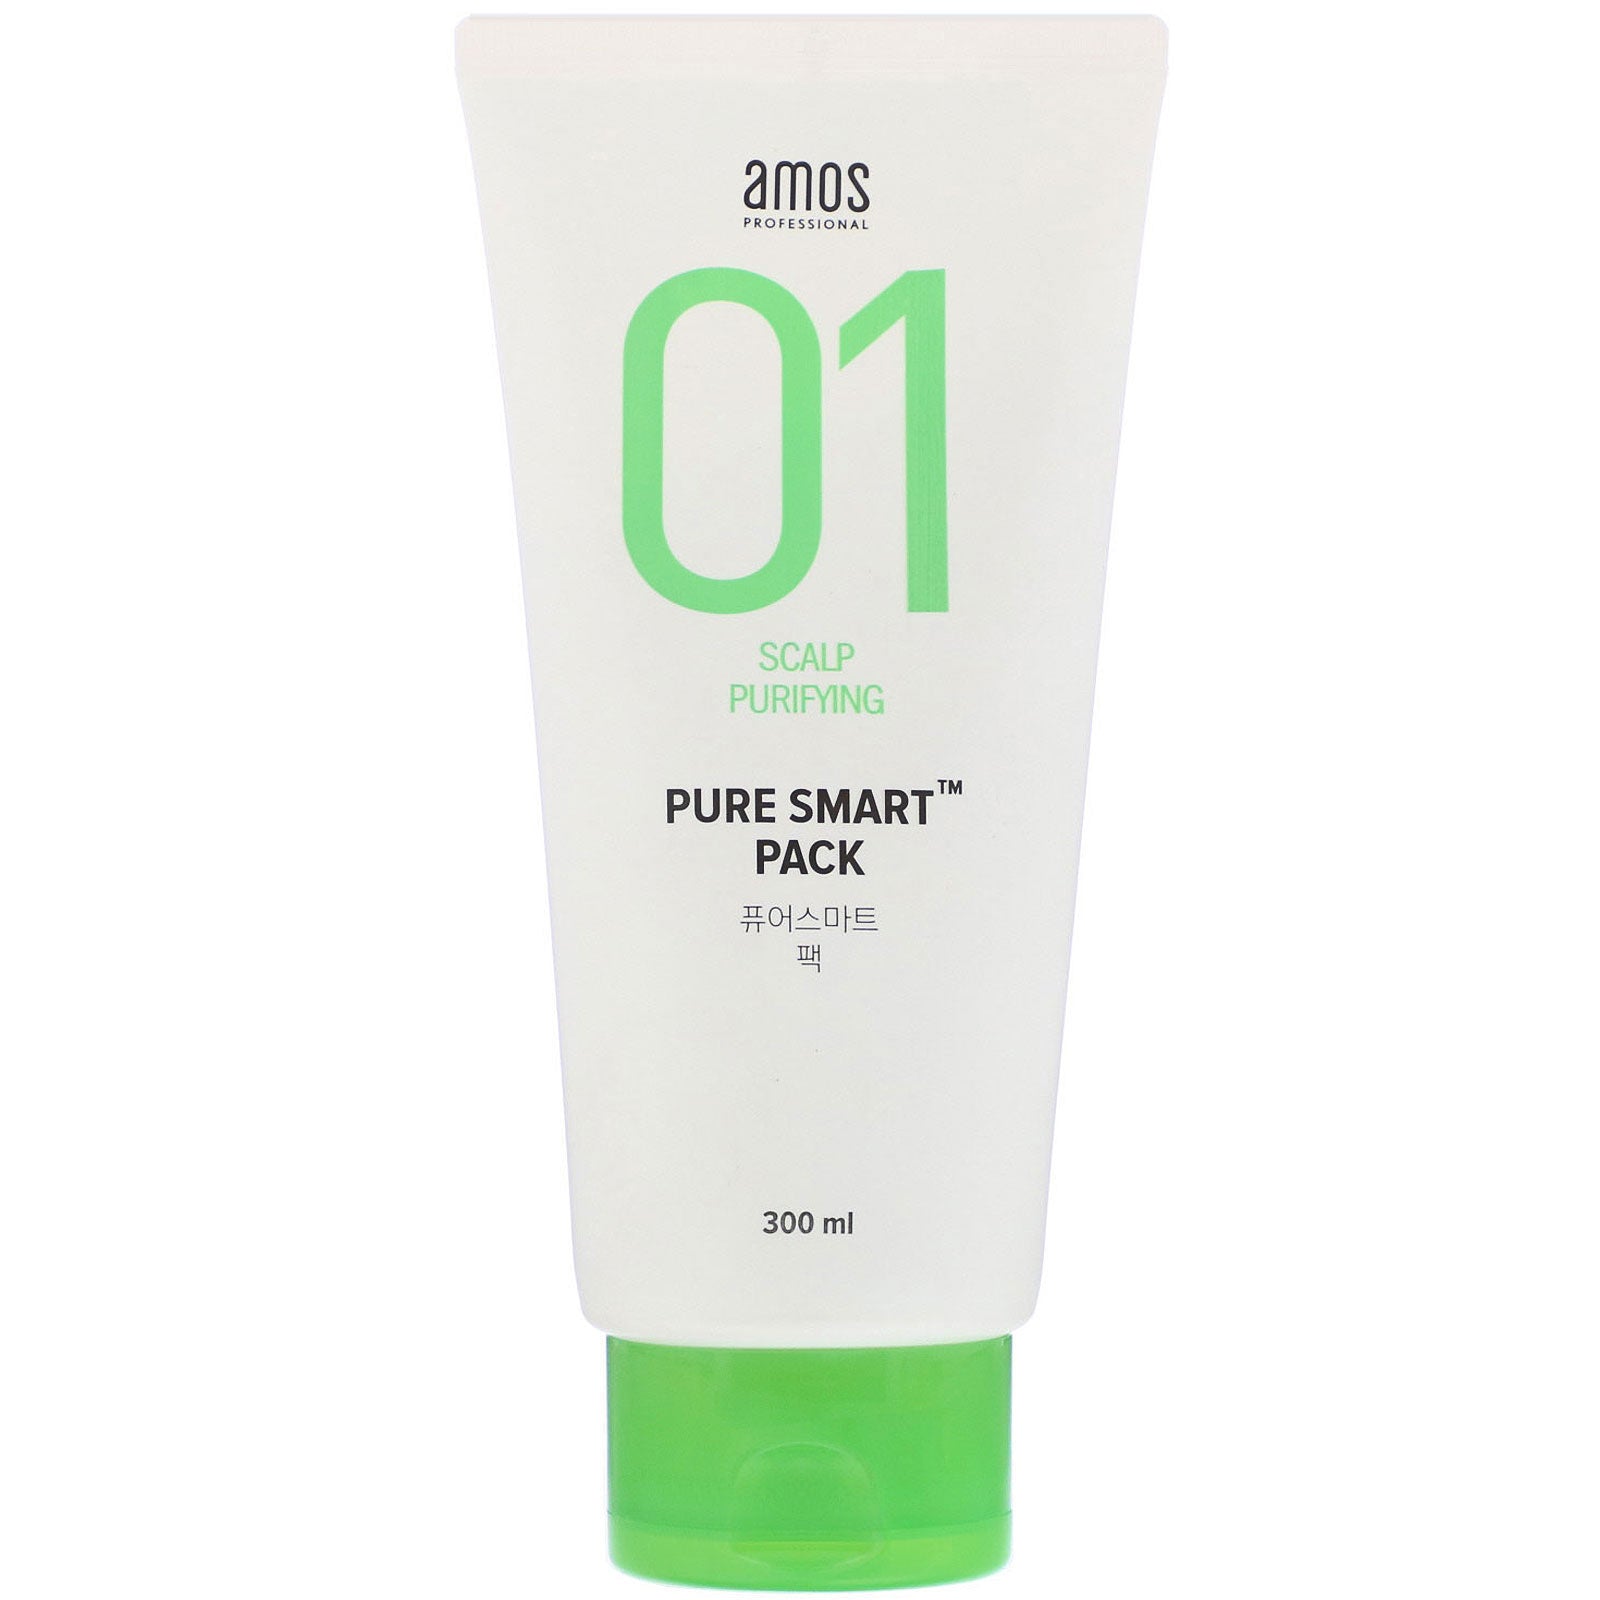 Amos, 01 Scalp Purifying, Pure Smart Pack, 300 ml